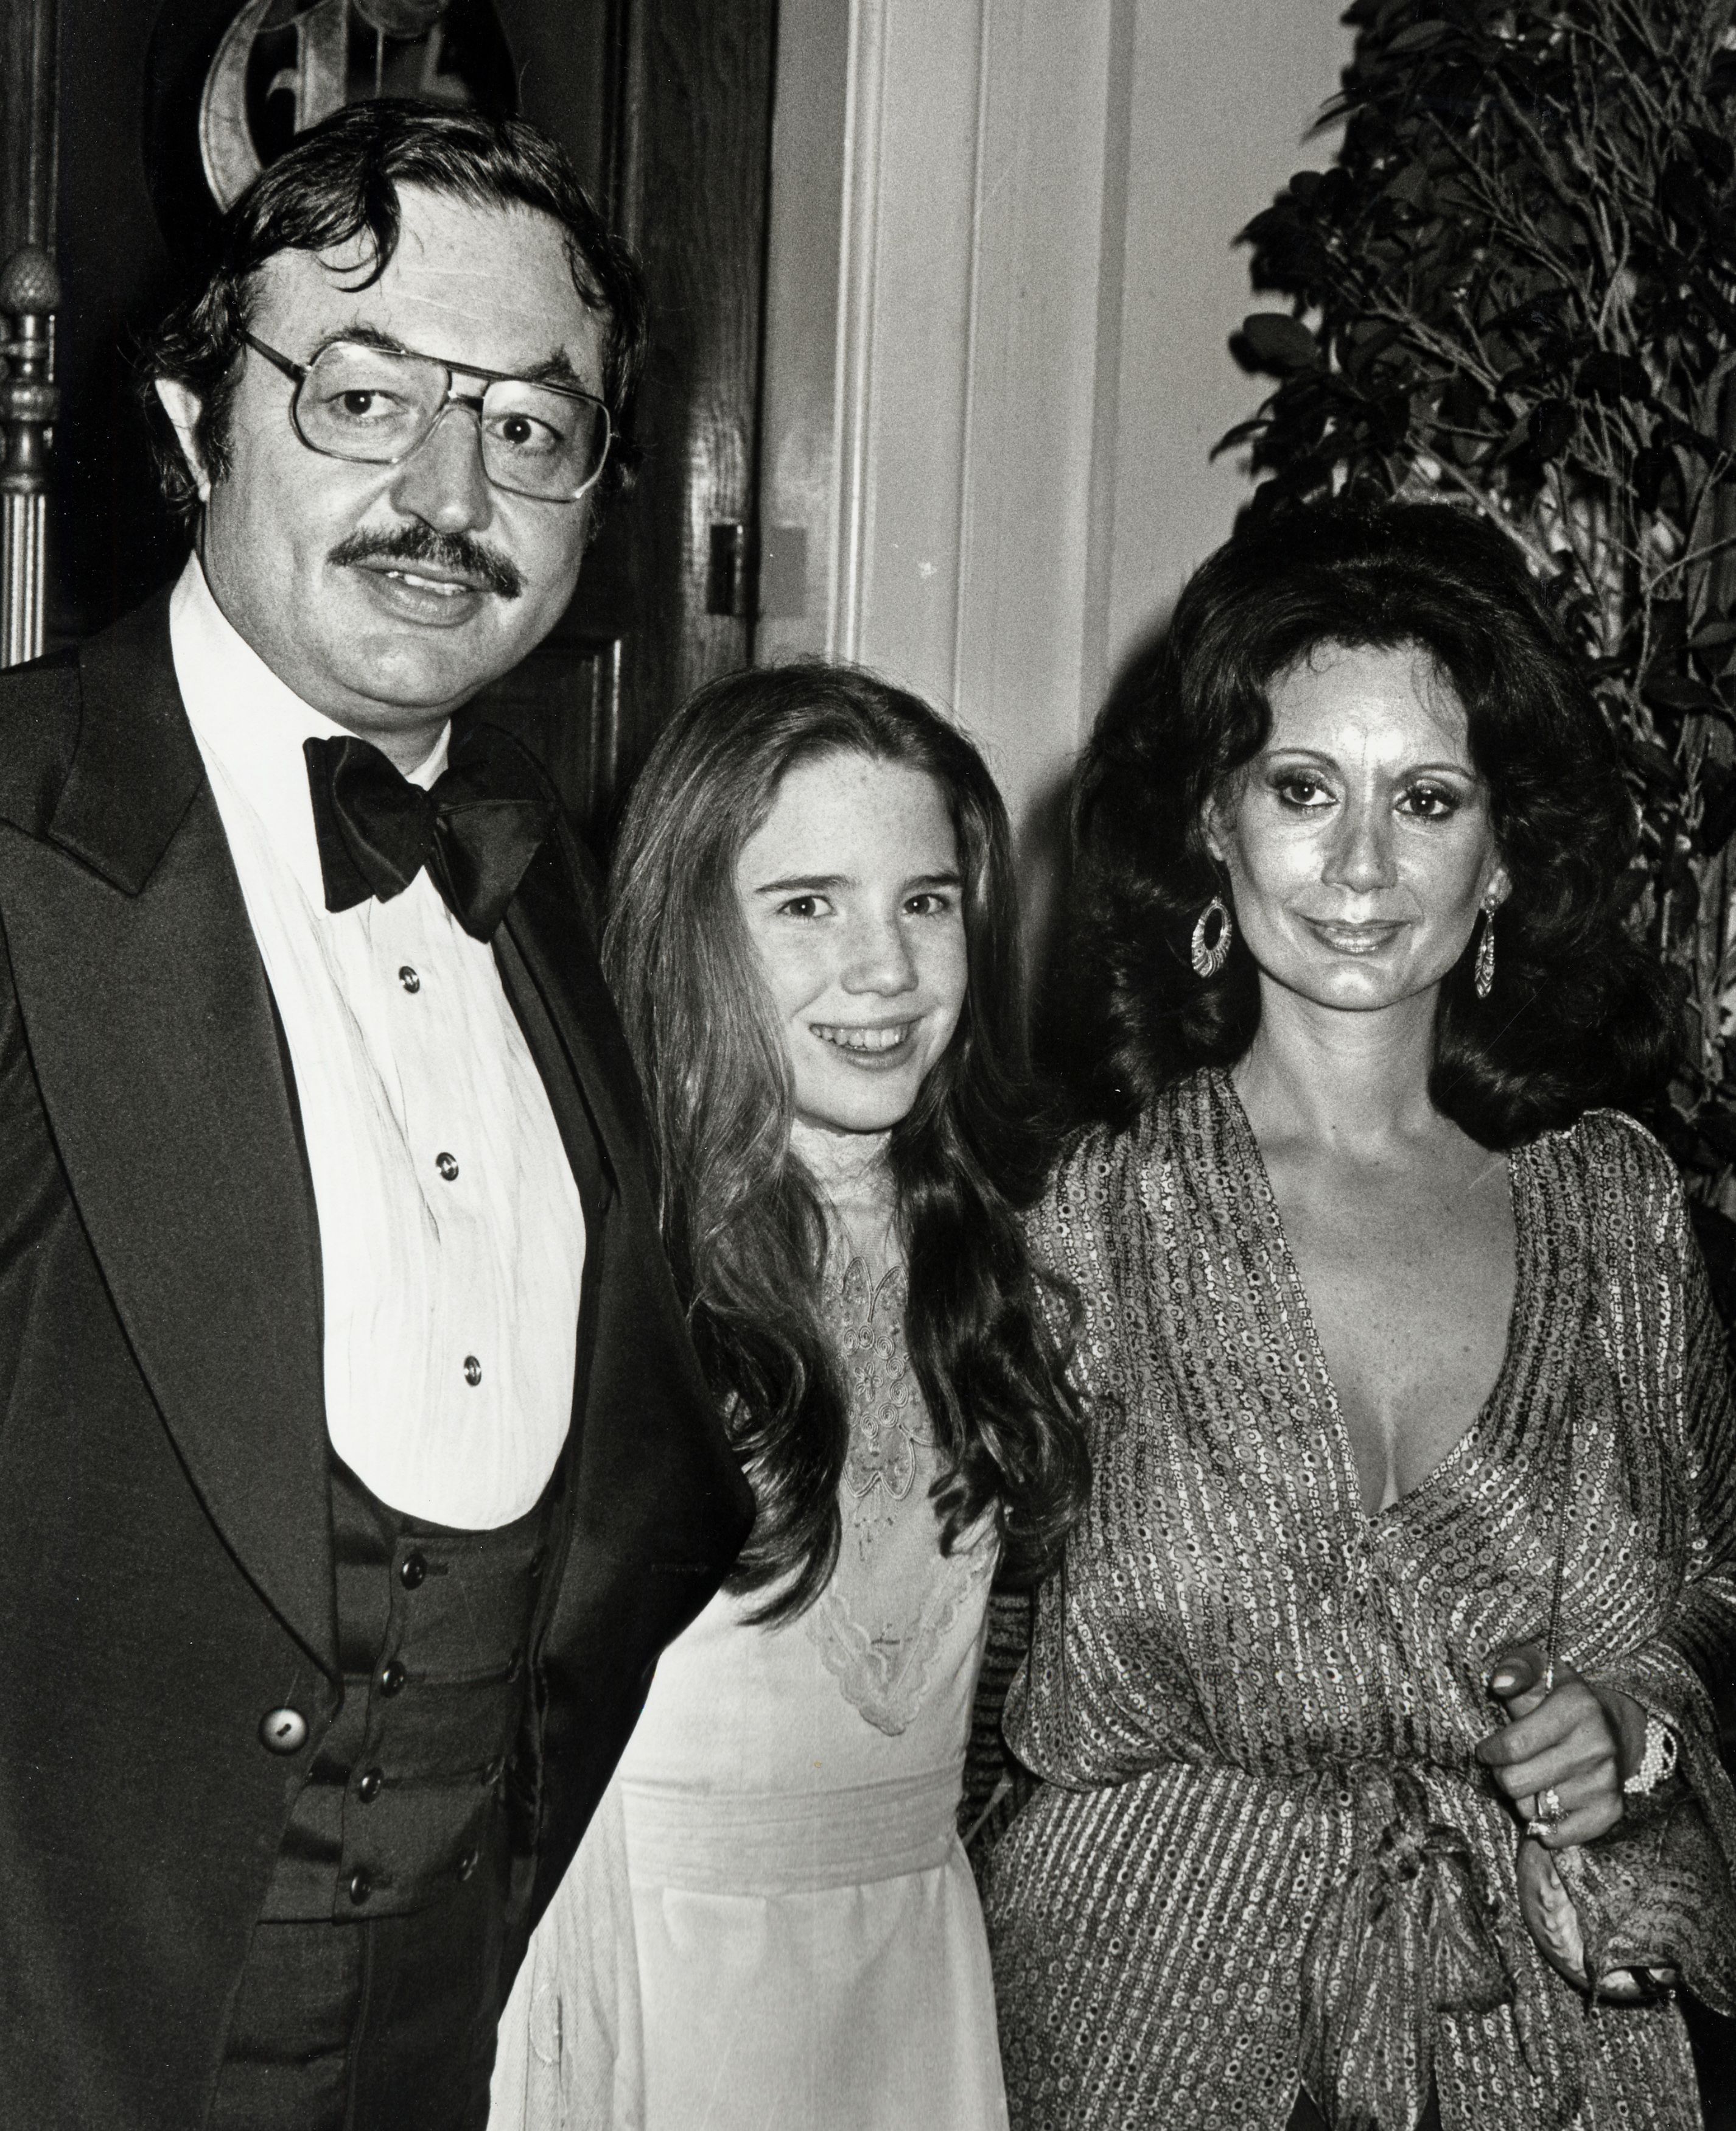 Paul Gilbert, Melissa Gilbert, and Barbara Crane at the 4th Annual People's Choice Awards on February 20, 1978 | Photo: Ron Galella/Ron Galella Collection/Getty Images